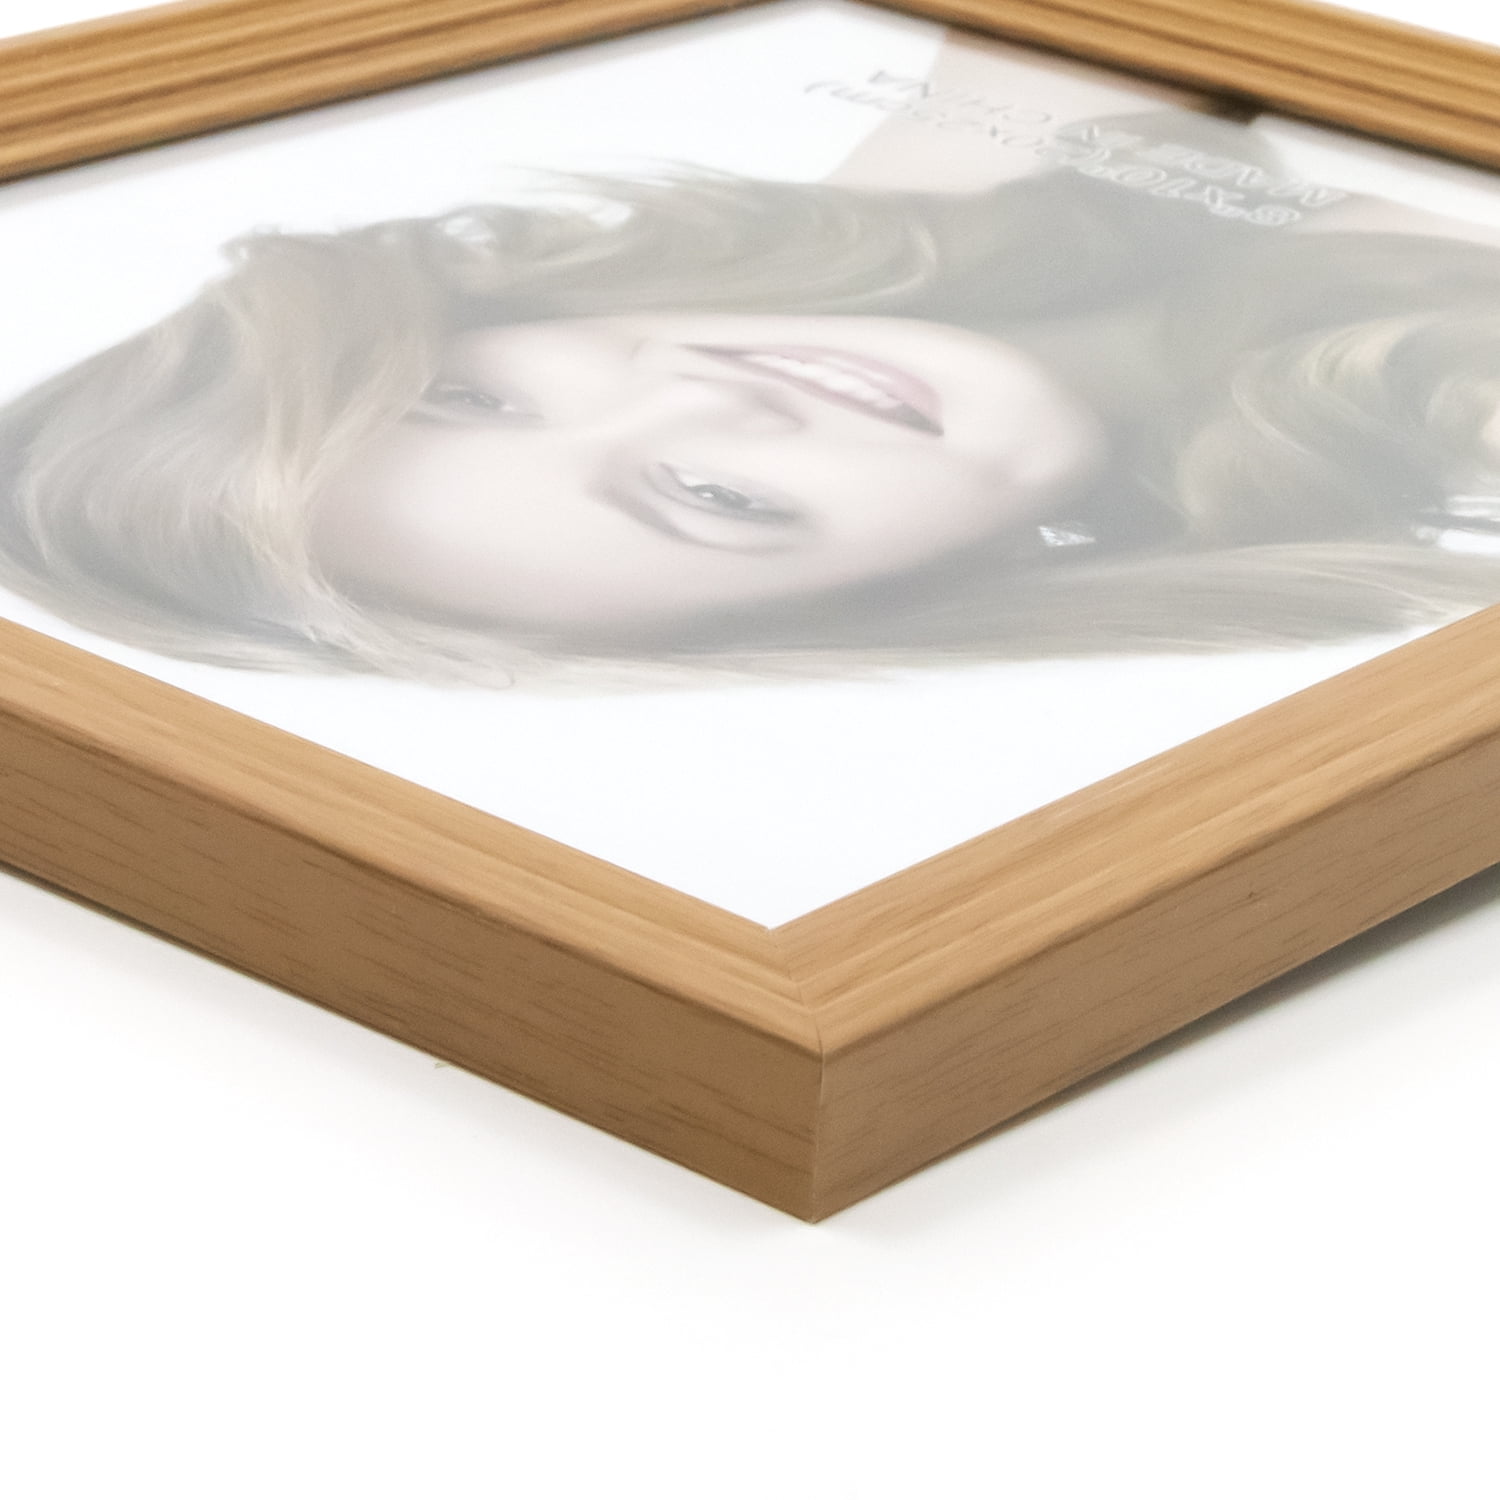 Maple 8x10 Standing Picture Frame by undefined